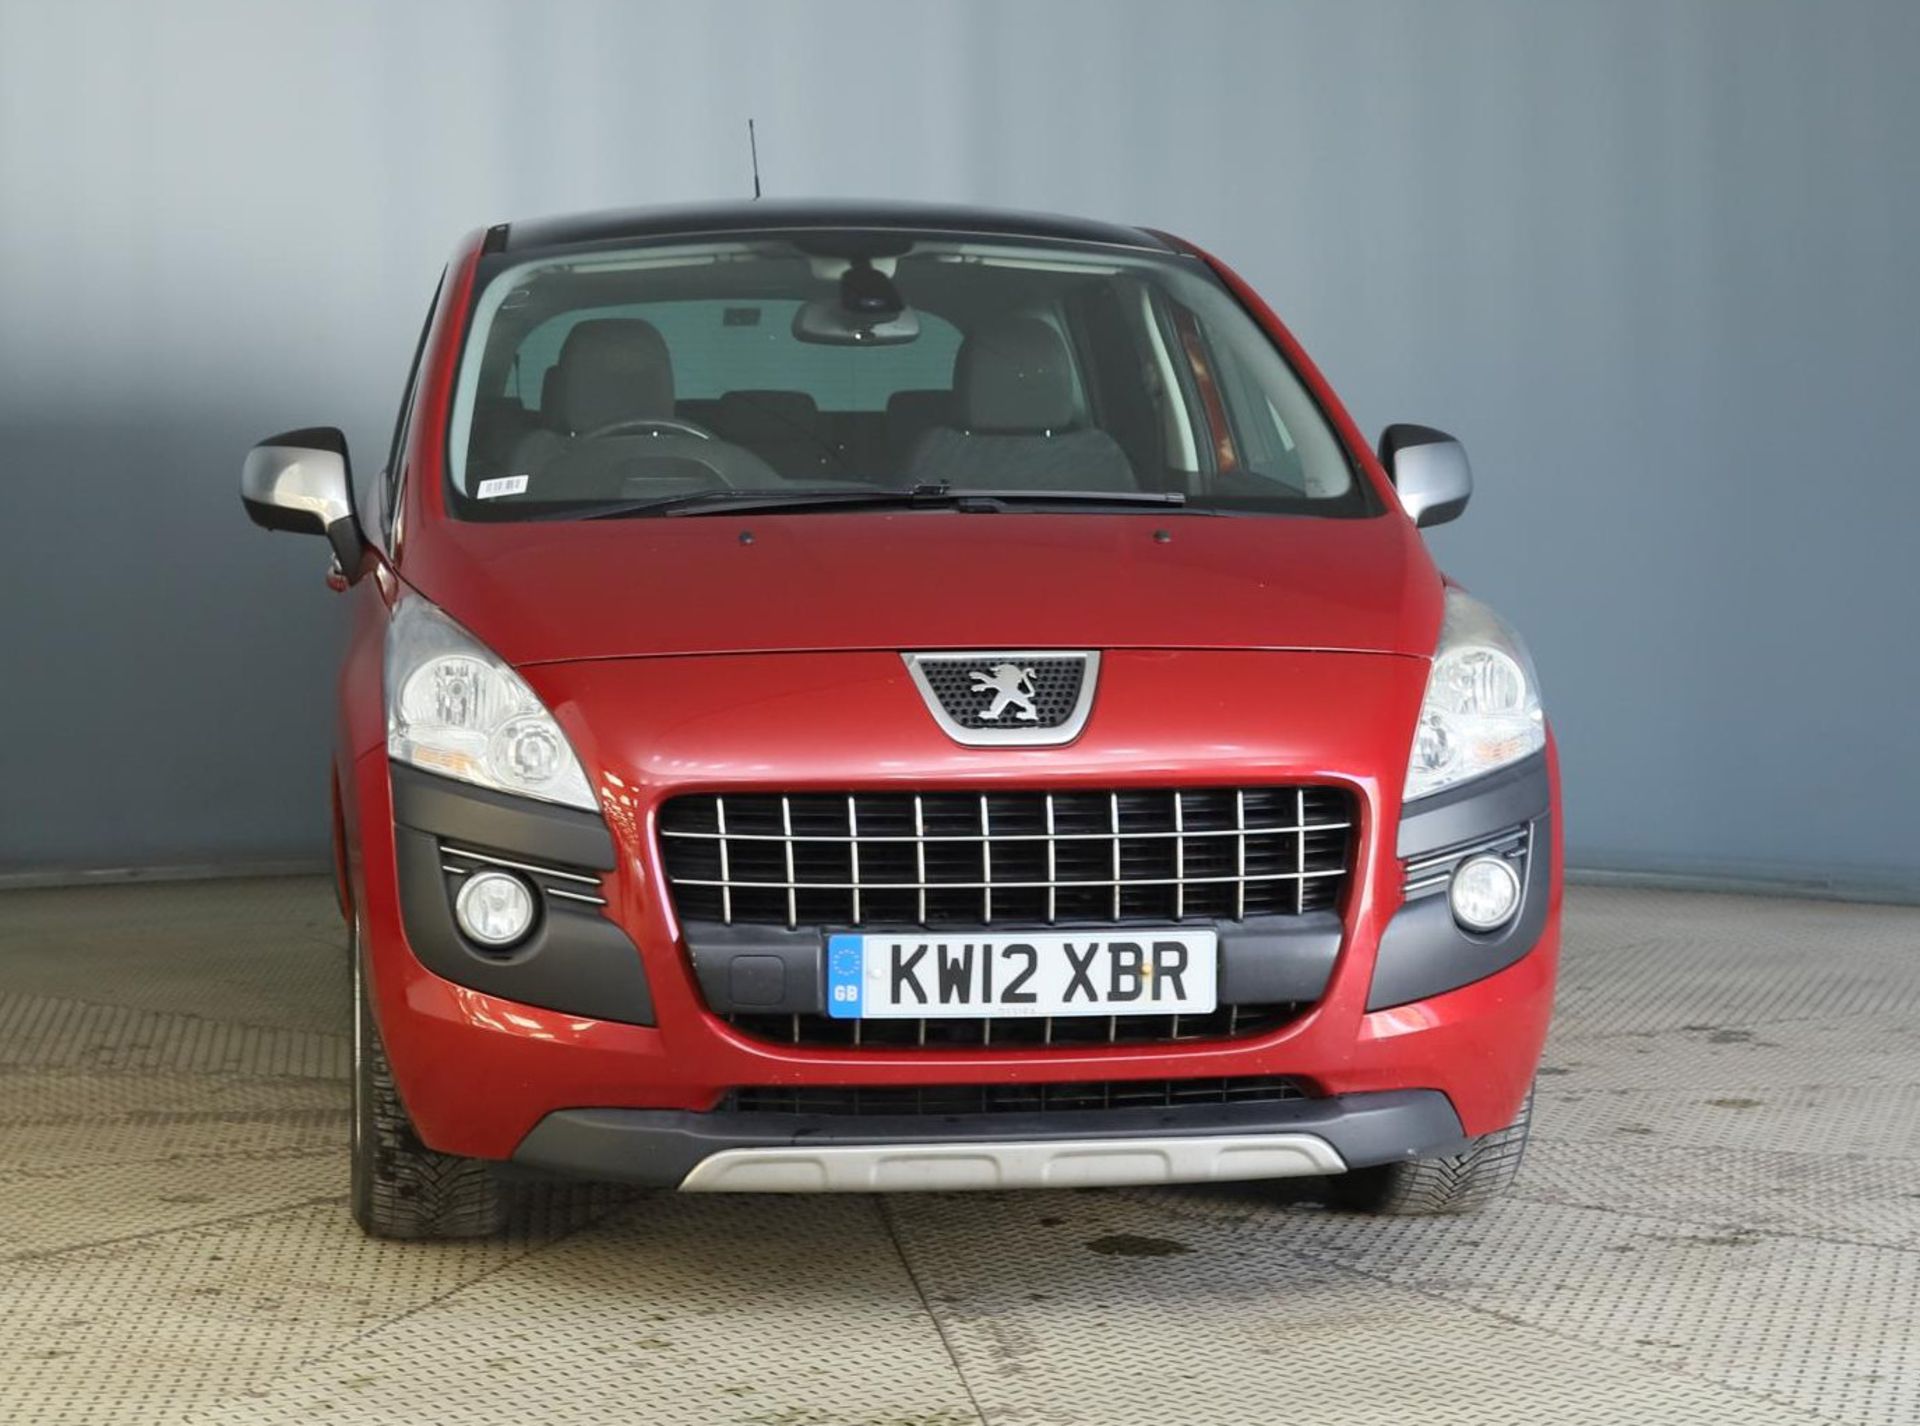 2012 Peugeot 3008 2.0 Hdi Allure 5 Door MPV - CL505 - NO VAT ON THE HAMMER - Location: Corby, Northa